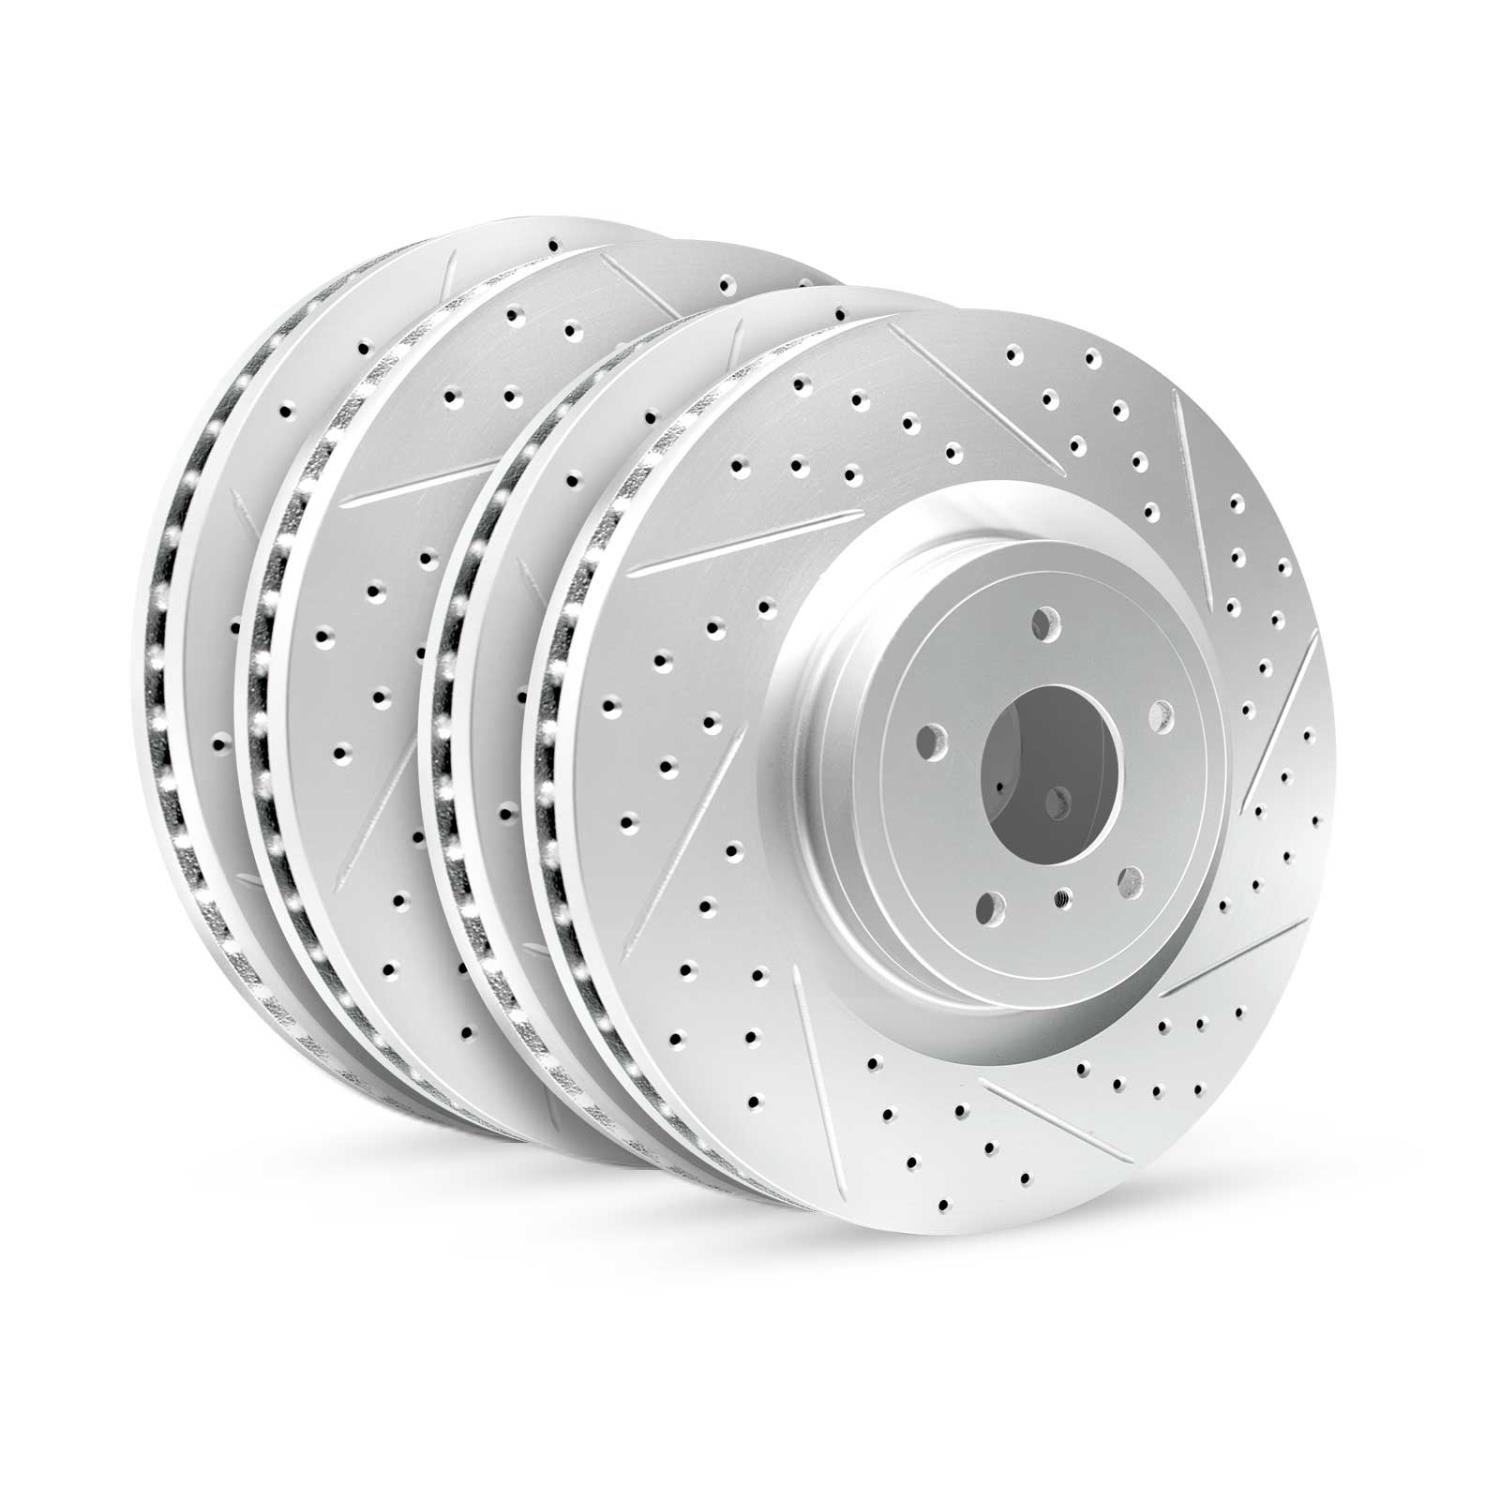 GEO-Carbon Drilled/Slotted Rotors, 1996-1998 BMW, Position: